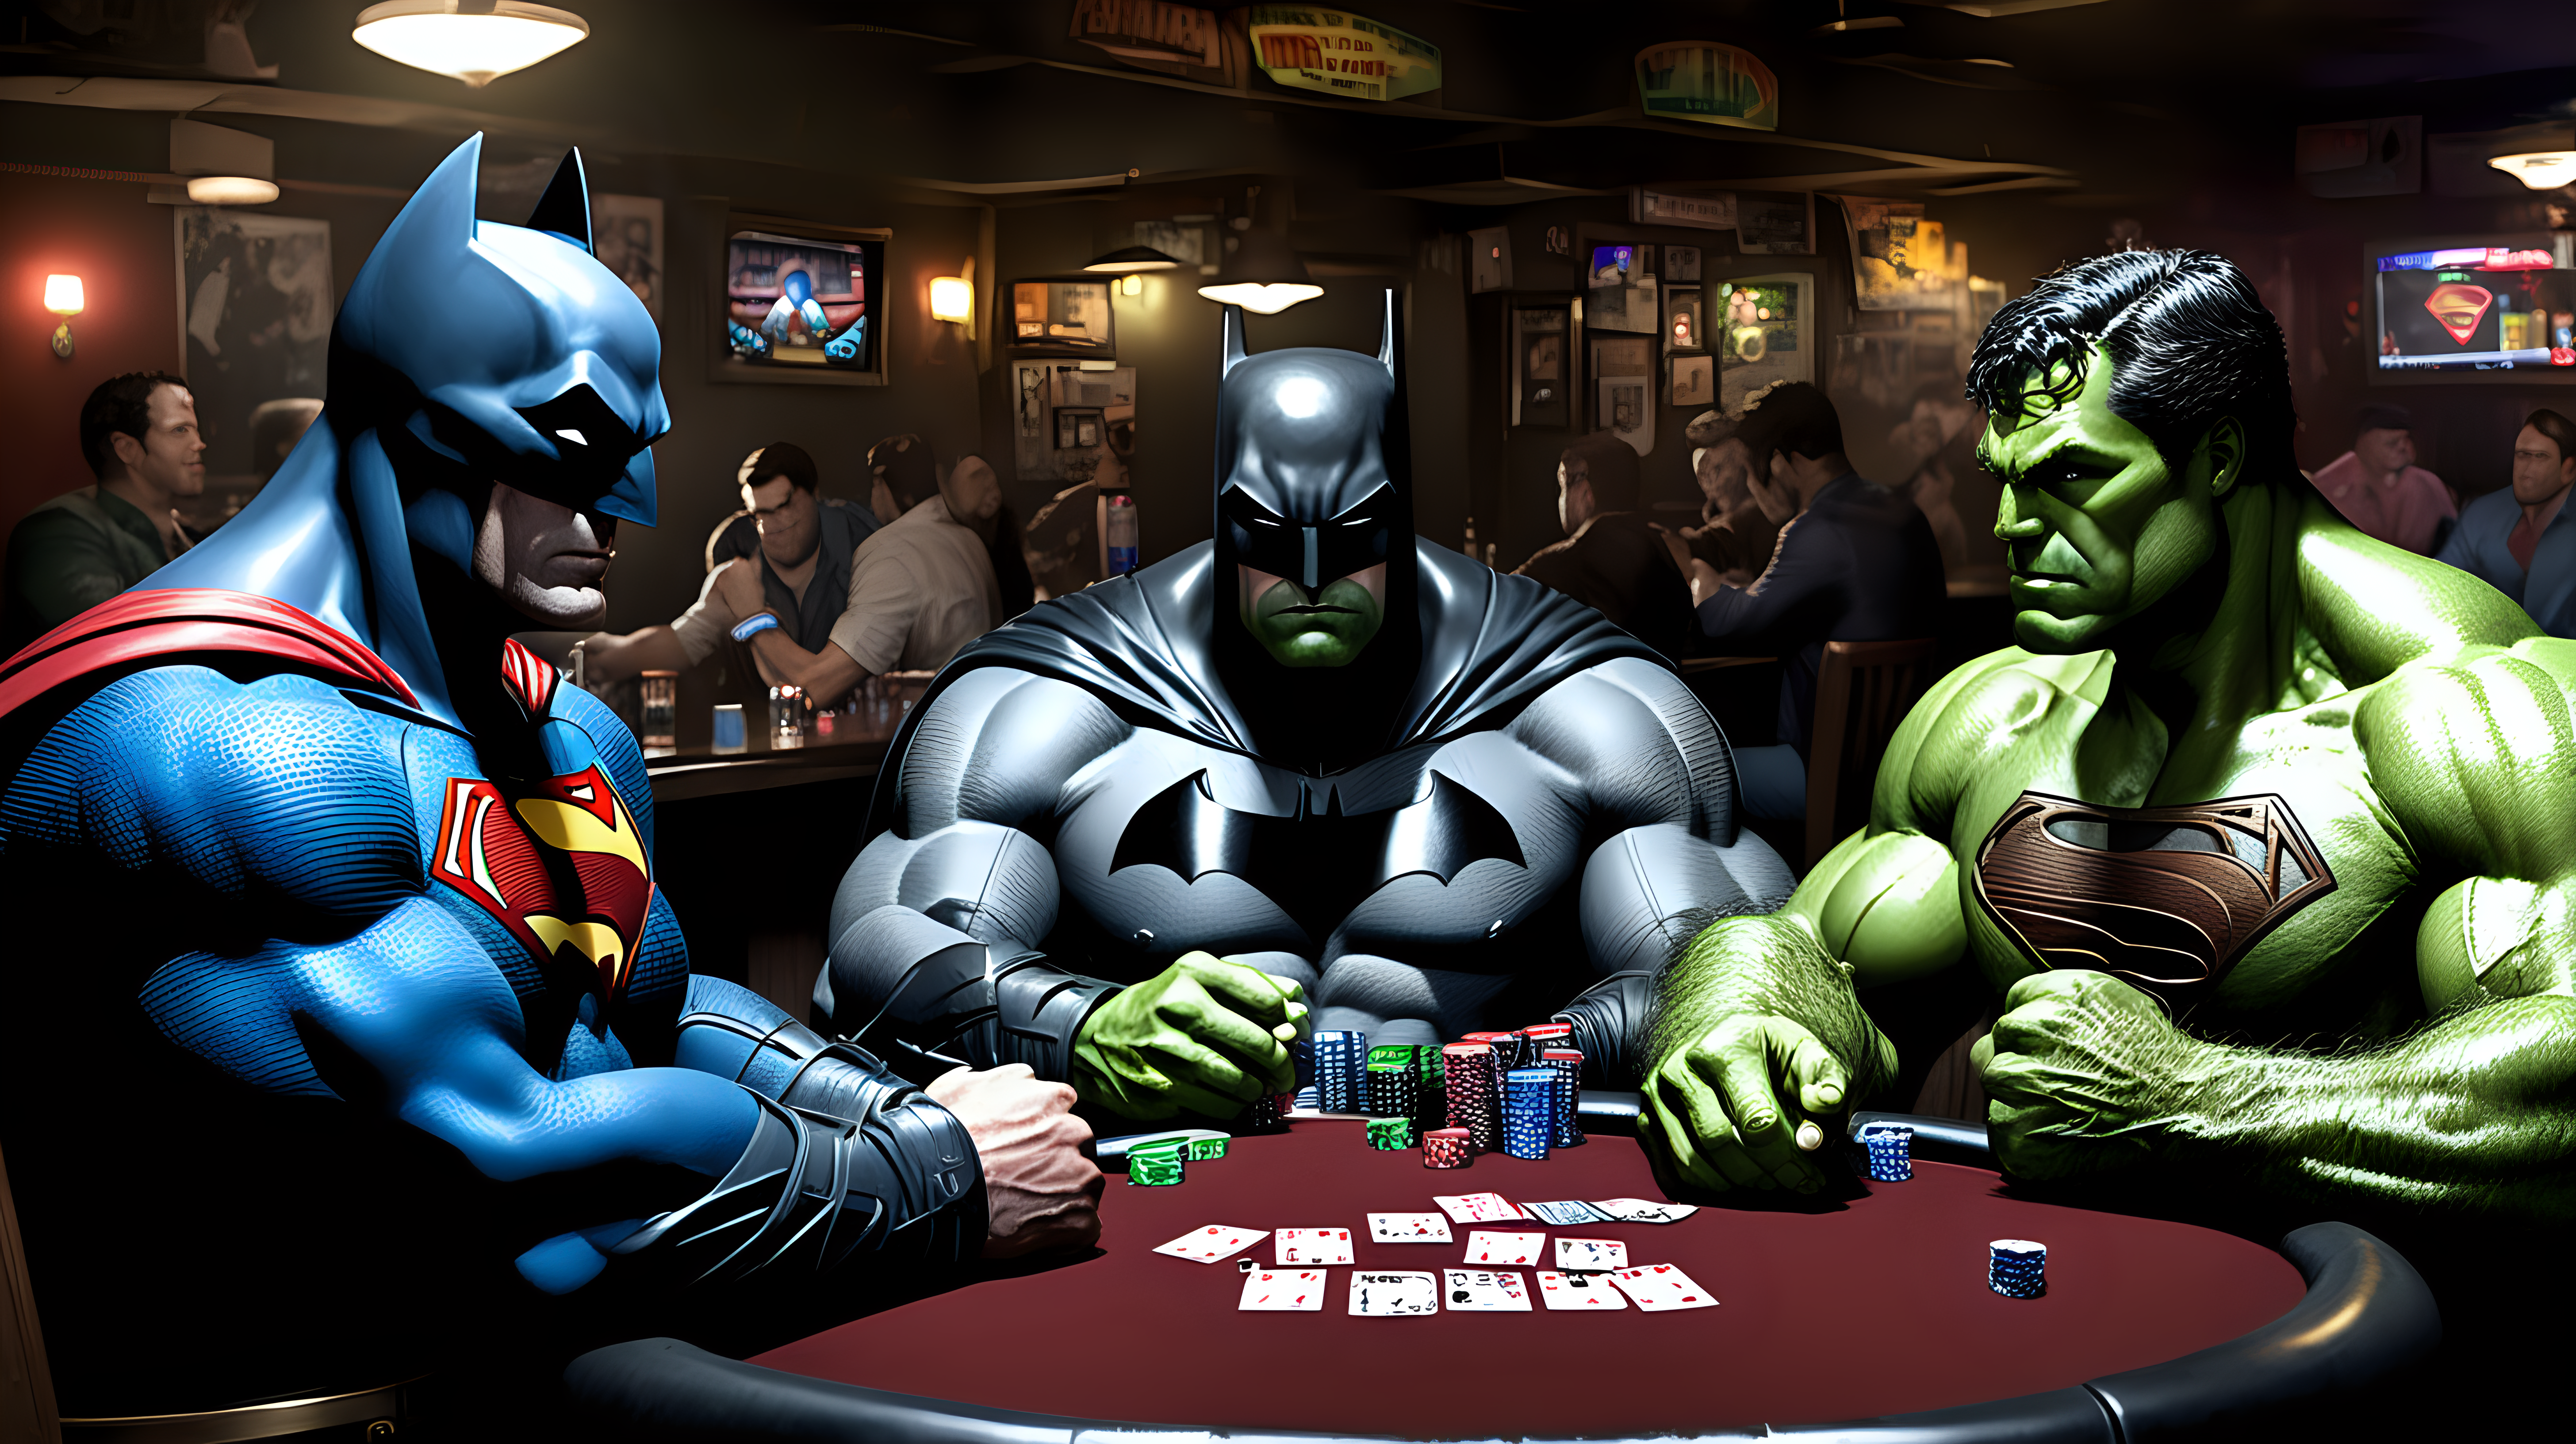 The Batman and Superman and Hulk playing poker and having drinks in a dive bar